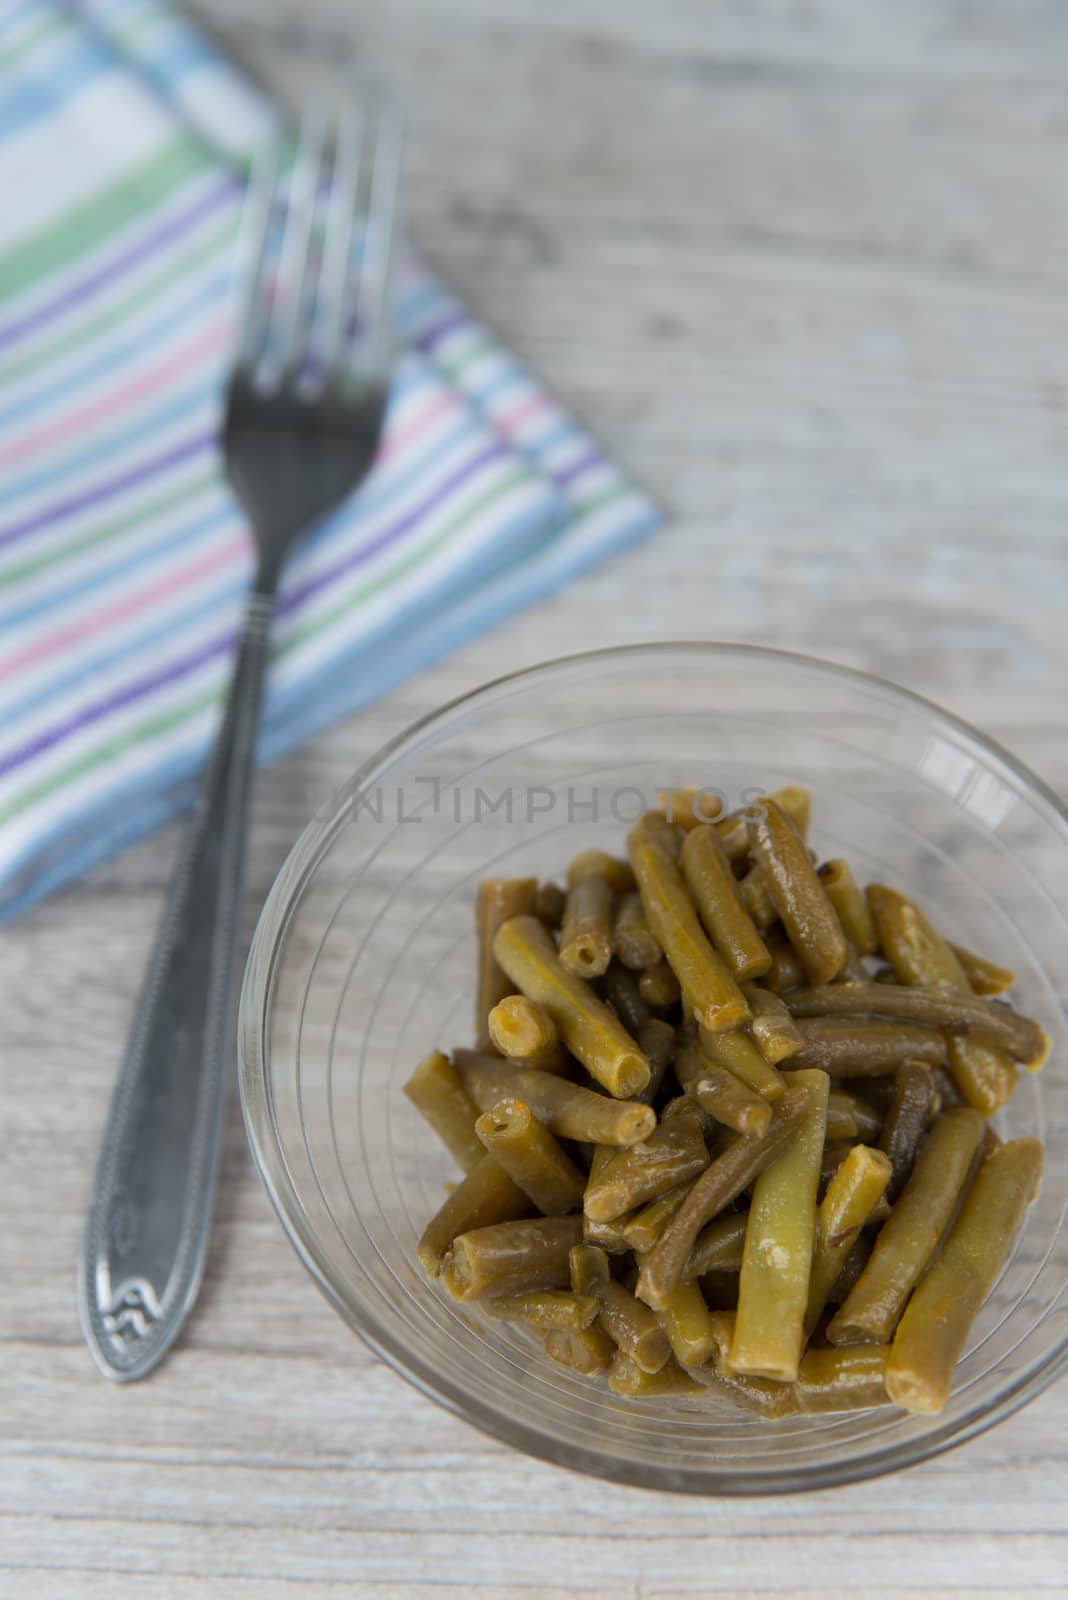 Plate of the green beans and fork by Linaga